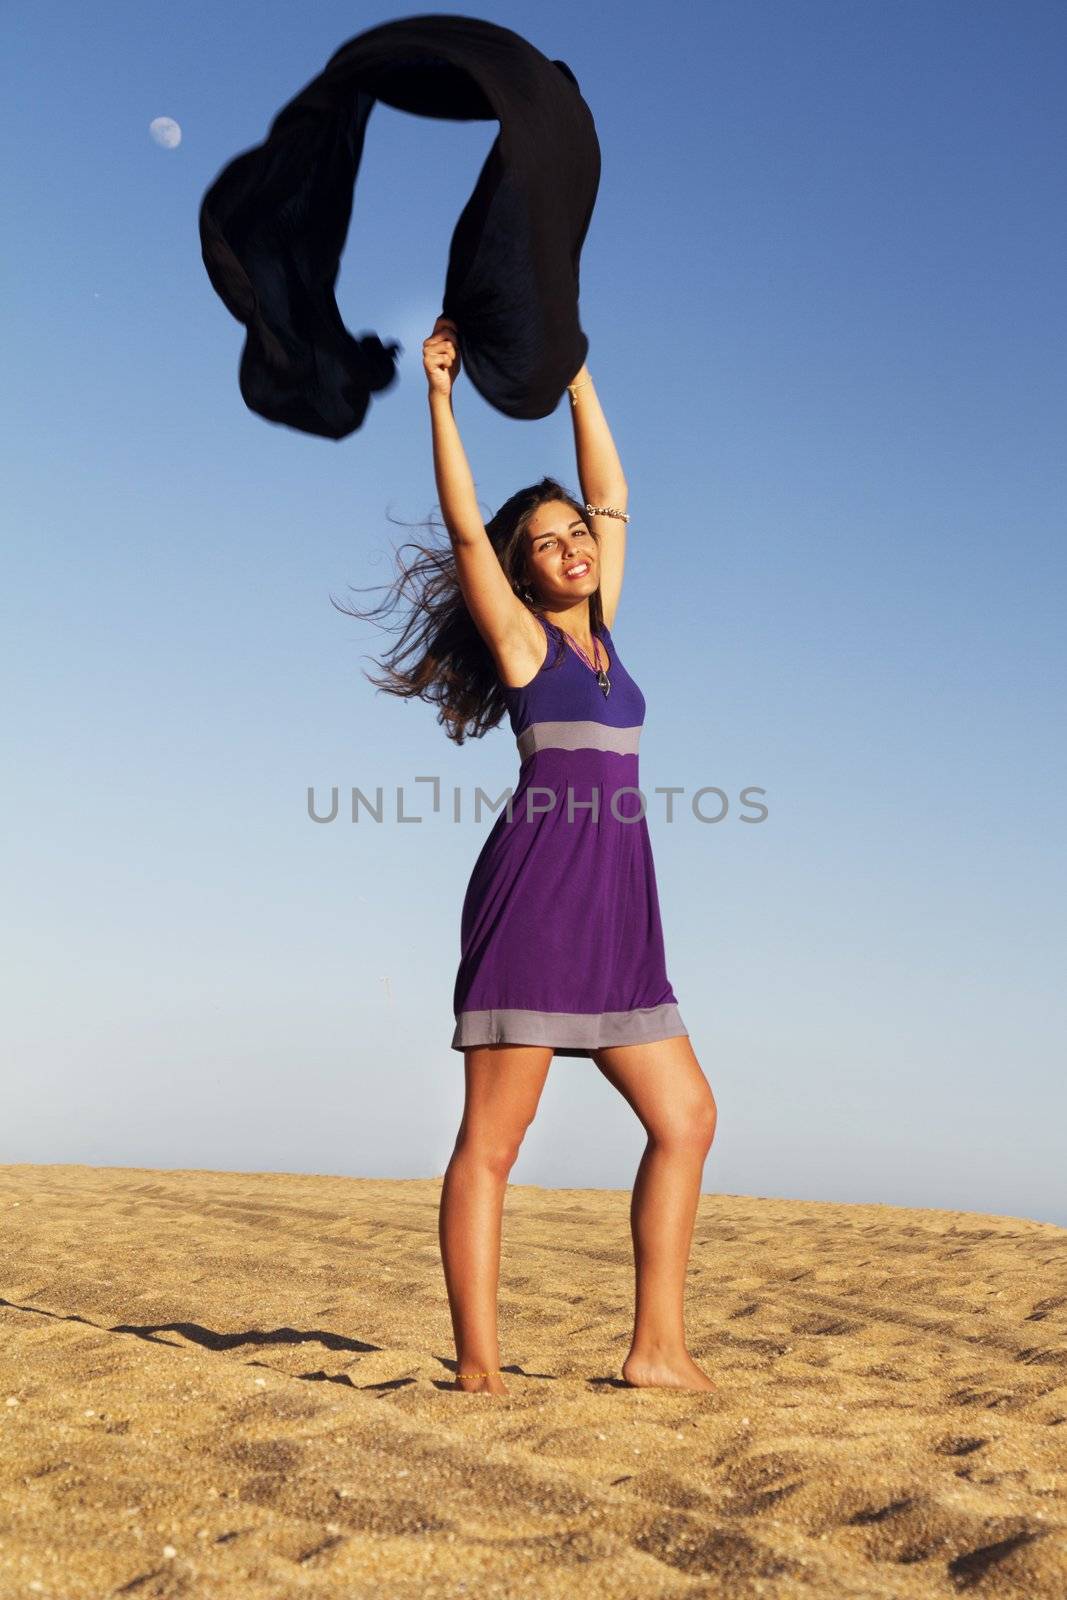 View of a beautiful young girl playful with a purple dress in the beach.